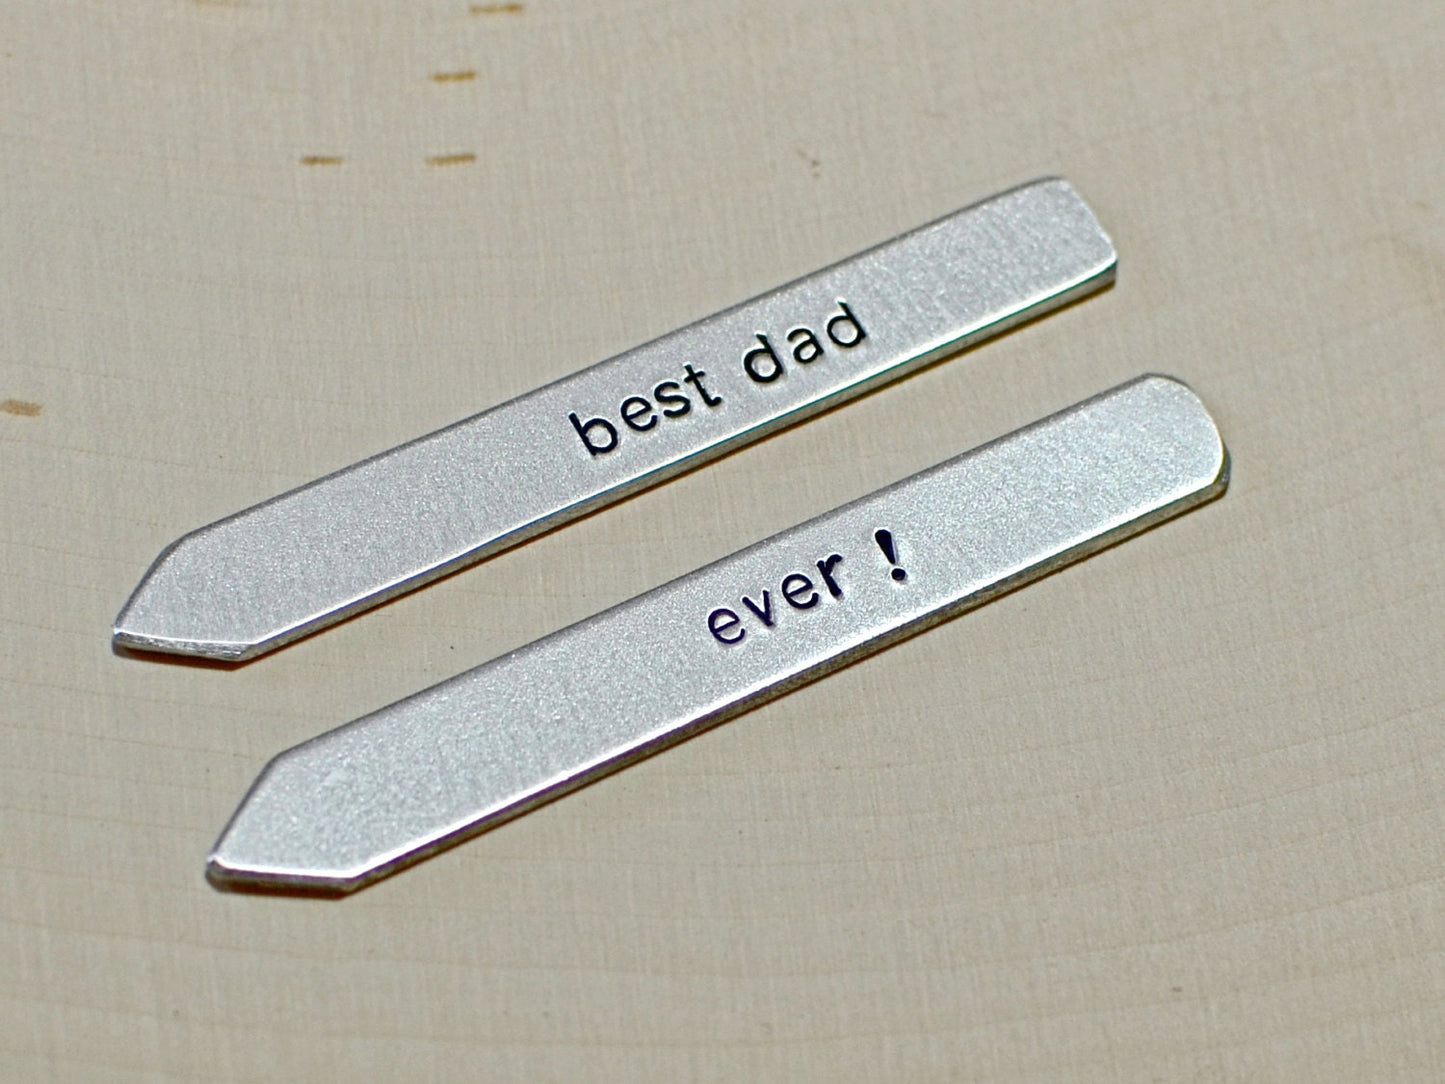 Collar stays for dad in your choice of silver or aluminum